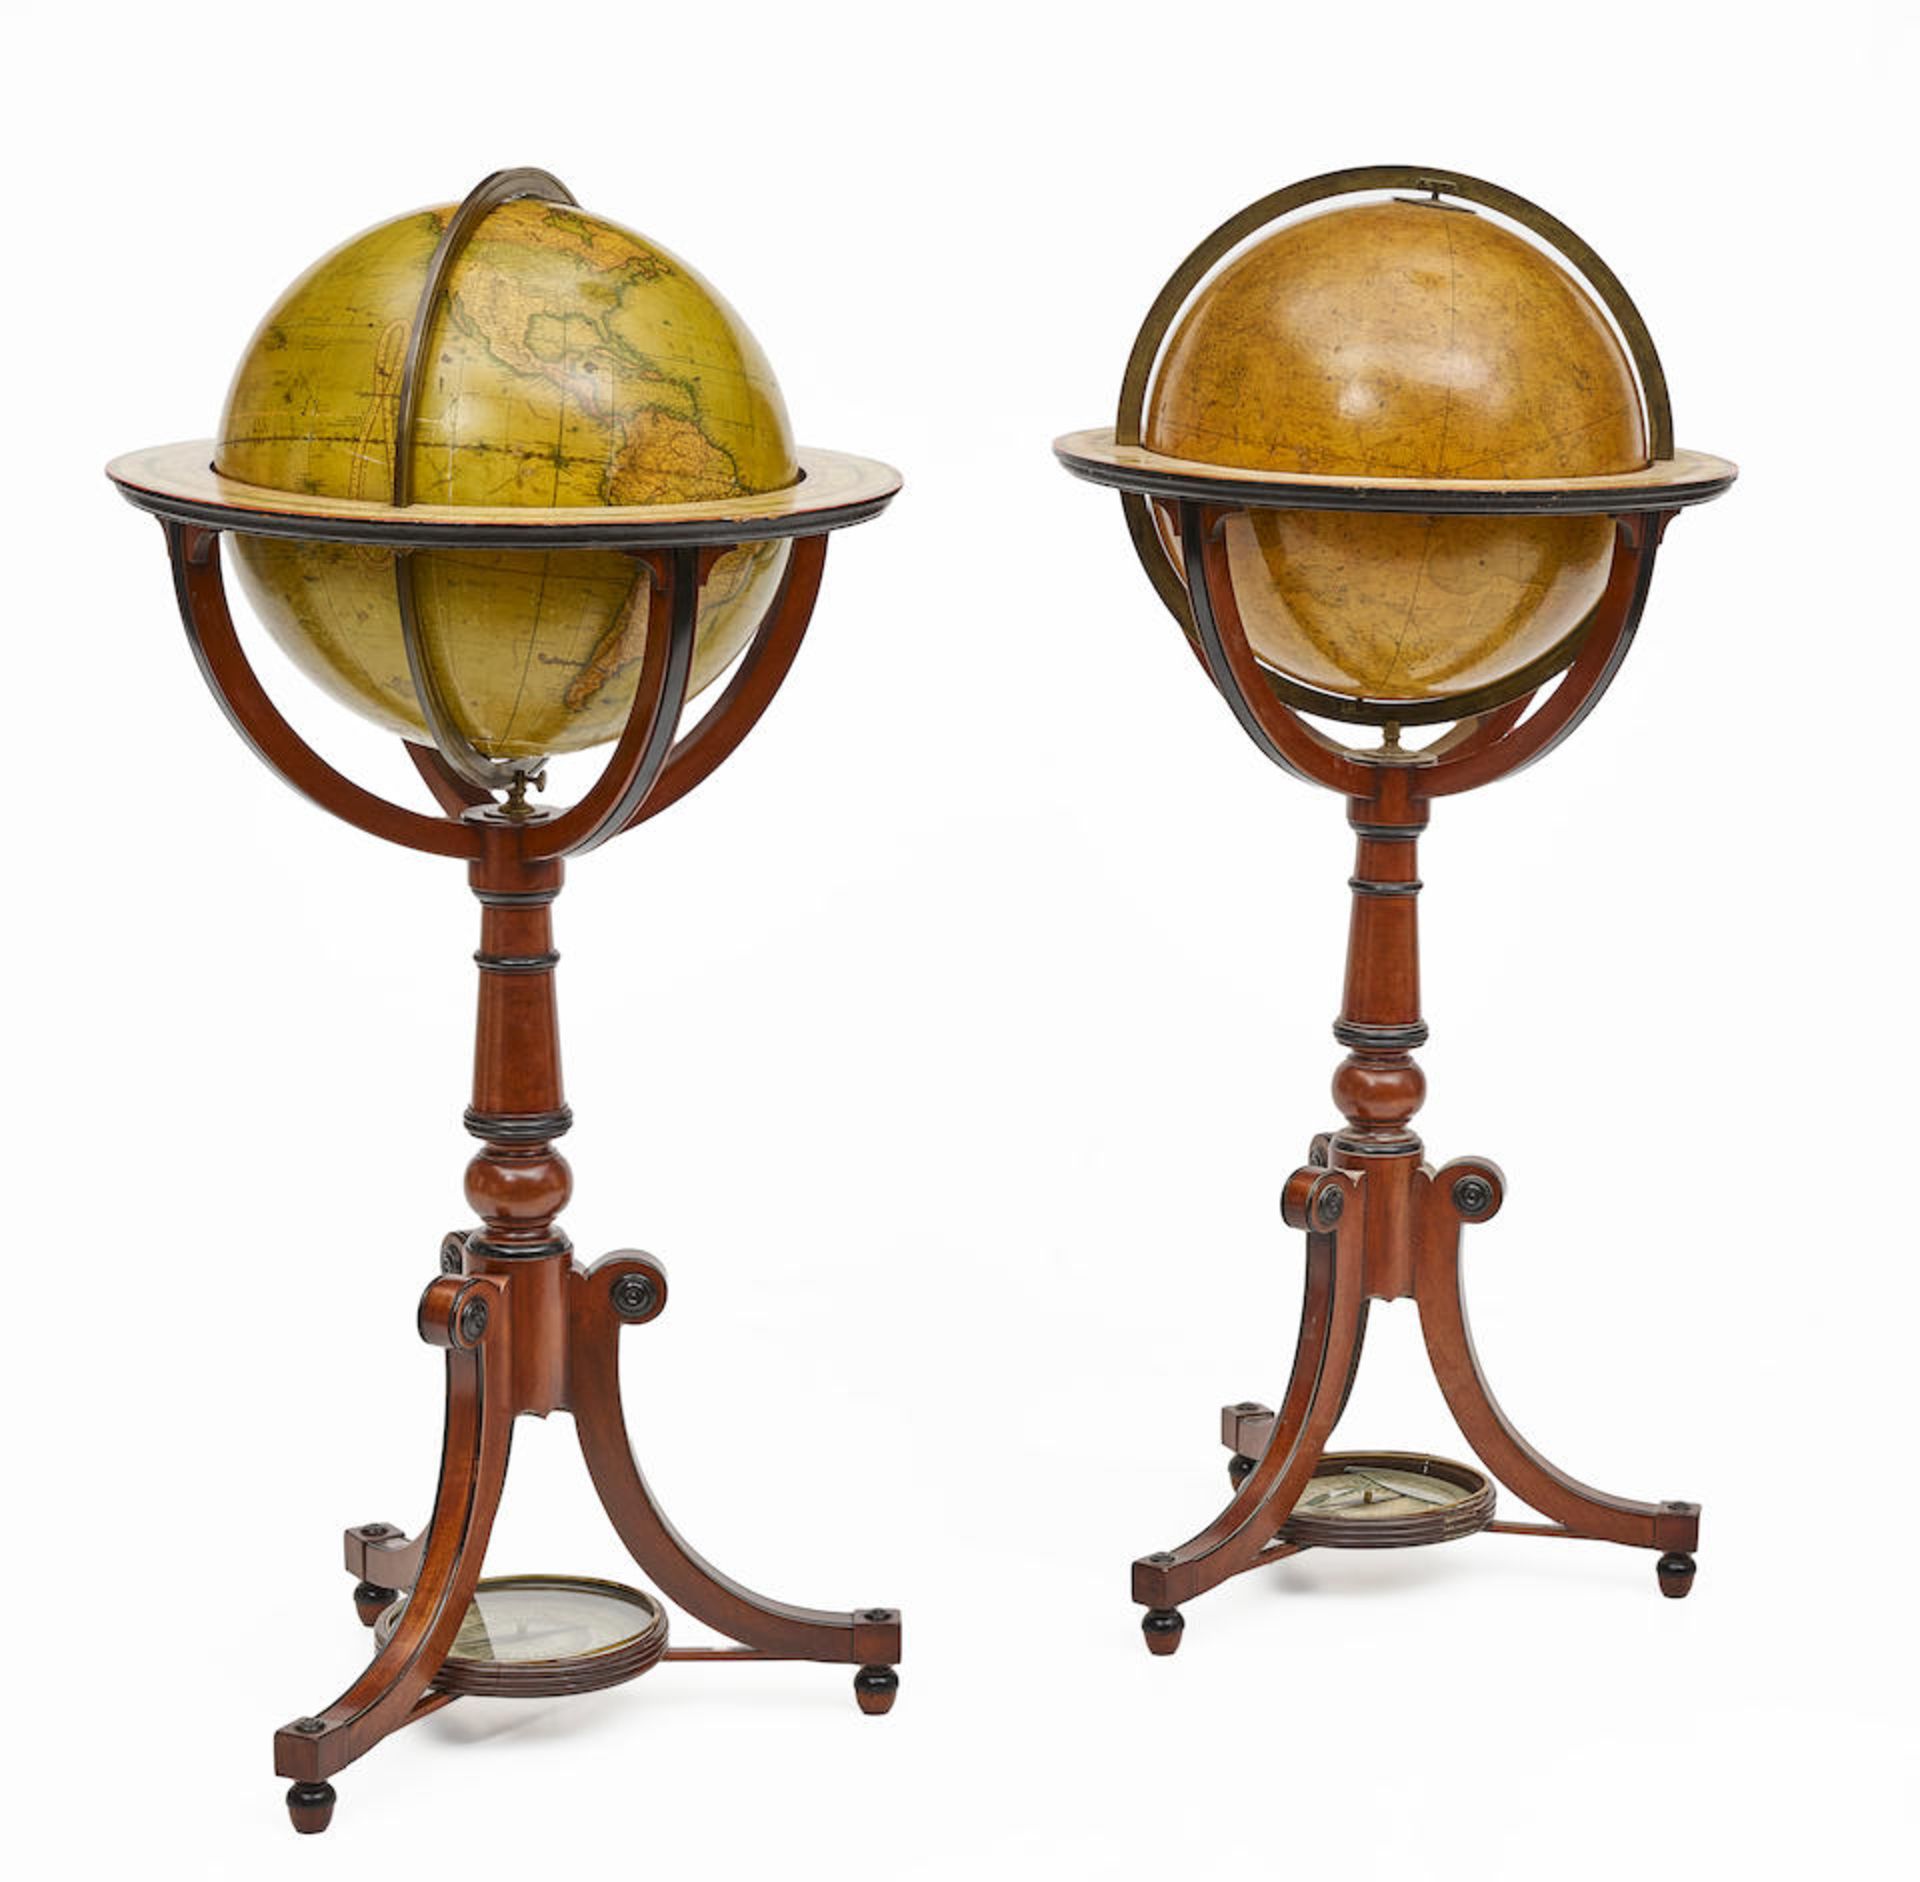 A PAIR OF REGENCY G. & J. CARY'S CELESTIAL AND TERRESTRIAL FLOOR GLOBESLondon, first quarter 19t...